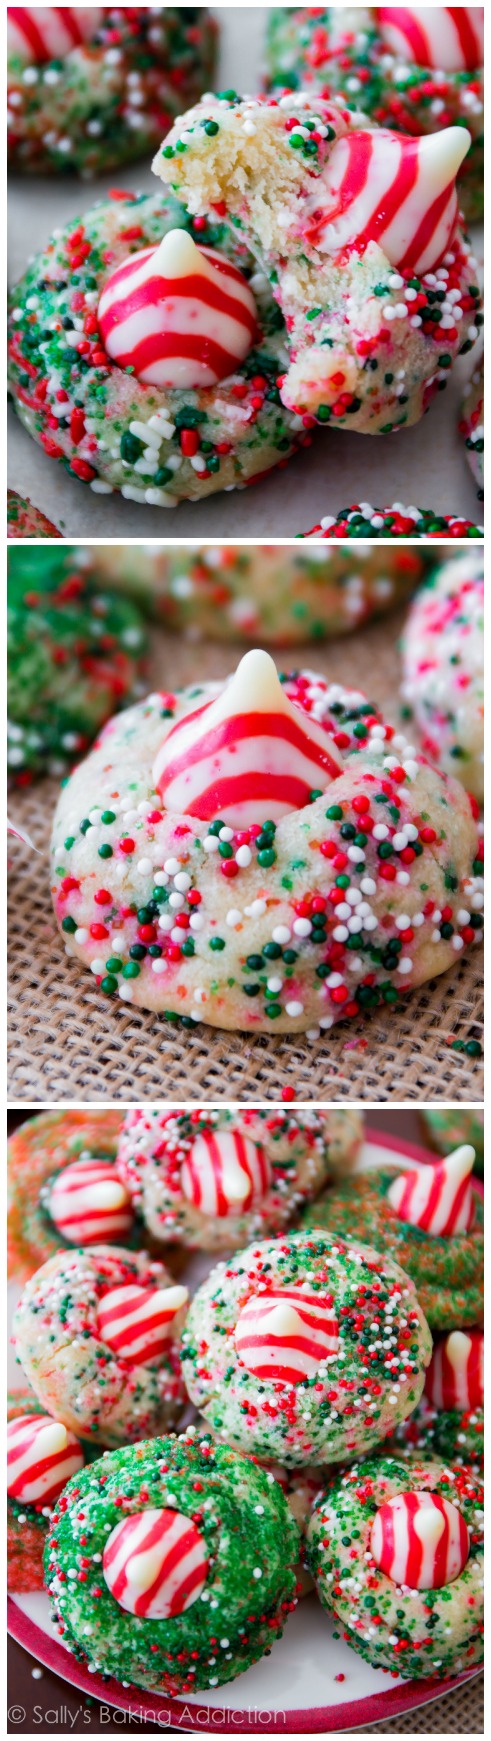 Candy Cane Kiss Cookies by Sally’s Baking Addiction